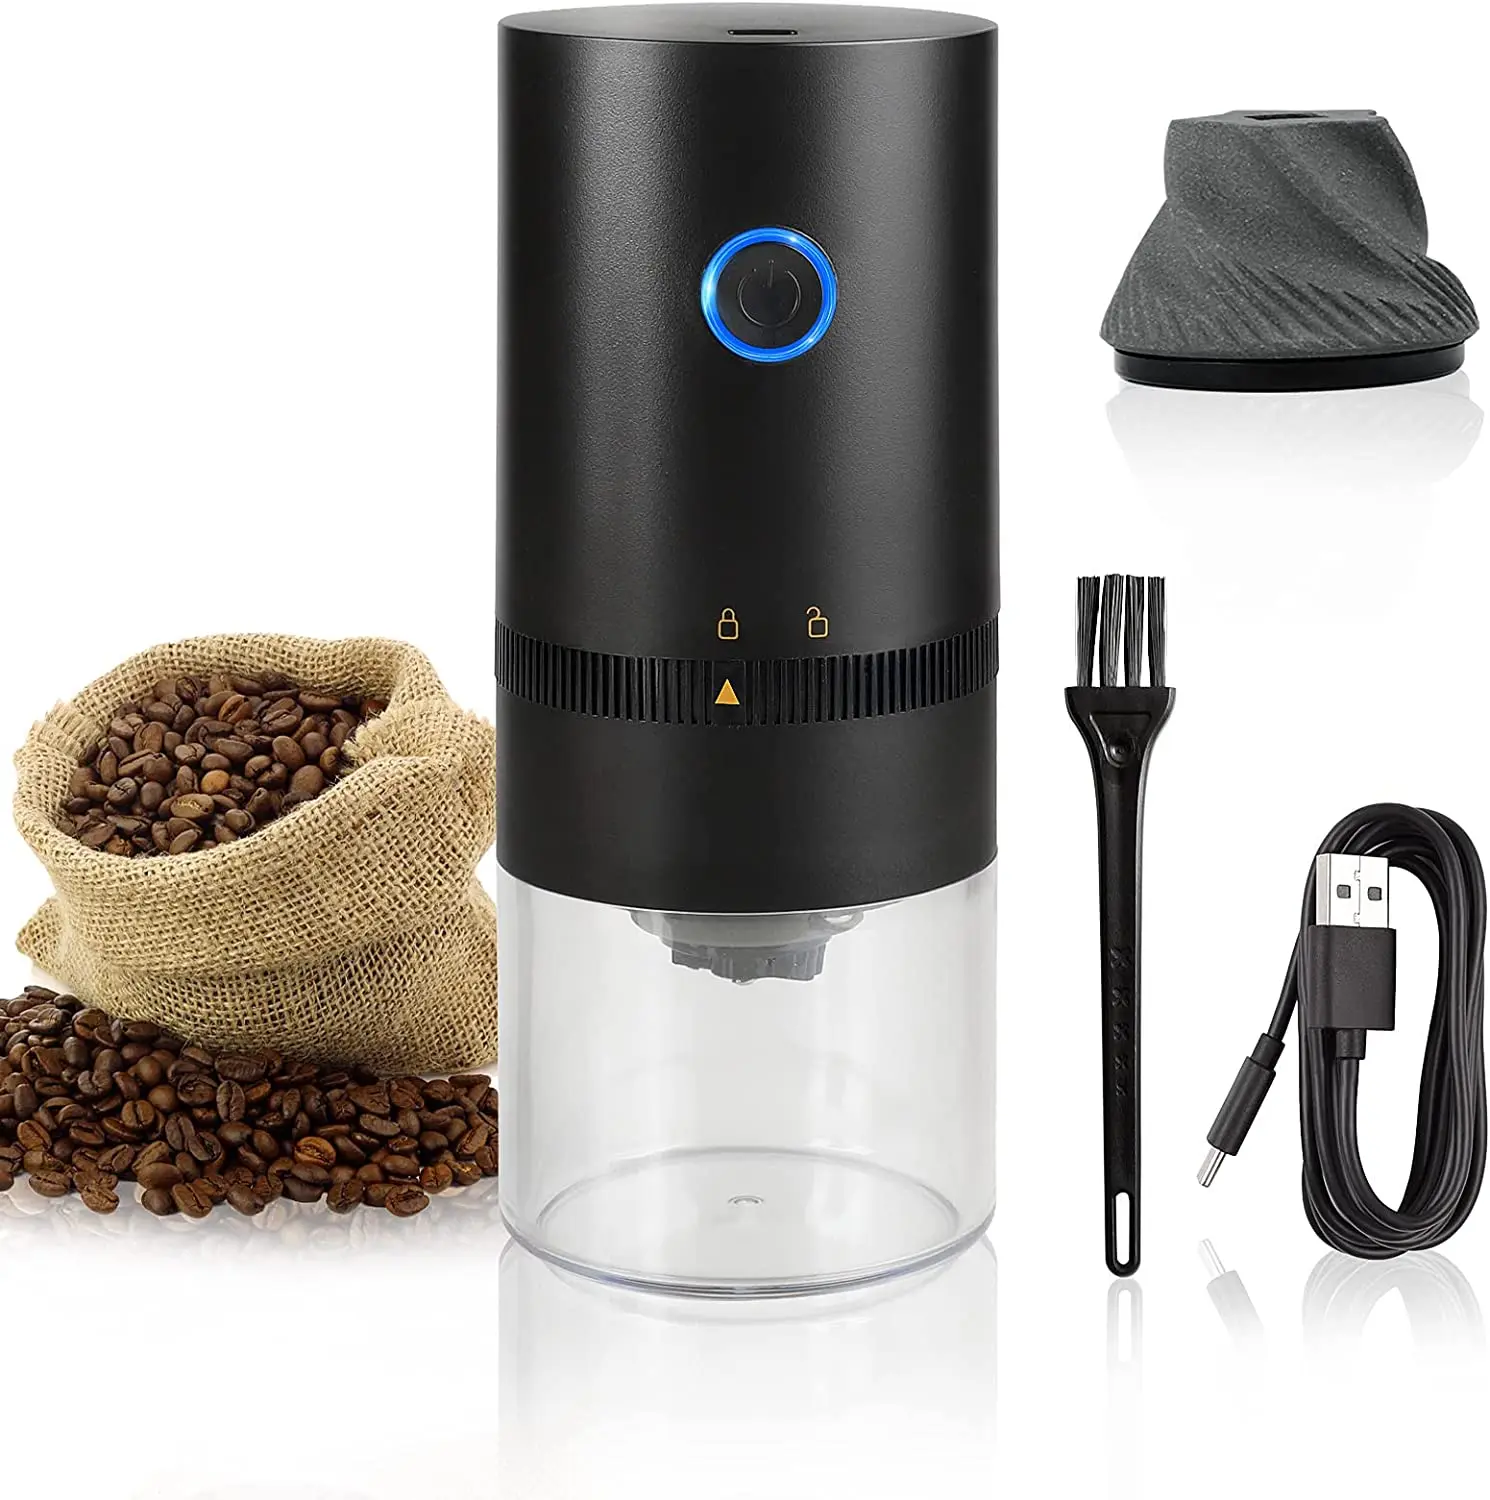 https://ae01.alicdn.com/kf/S08106b577ac04c93bcb8c645442d7e2cy/Portable-Electric-Coffee-Grinder-Cafe-Automatic-Coffee-Beans-Mill-Conical-Burr-Grinder-Machine-for-Home-Travel.jpg